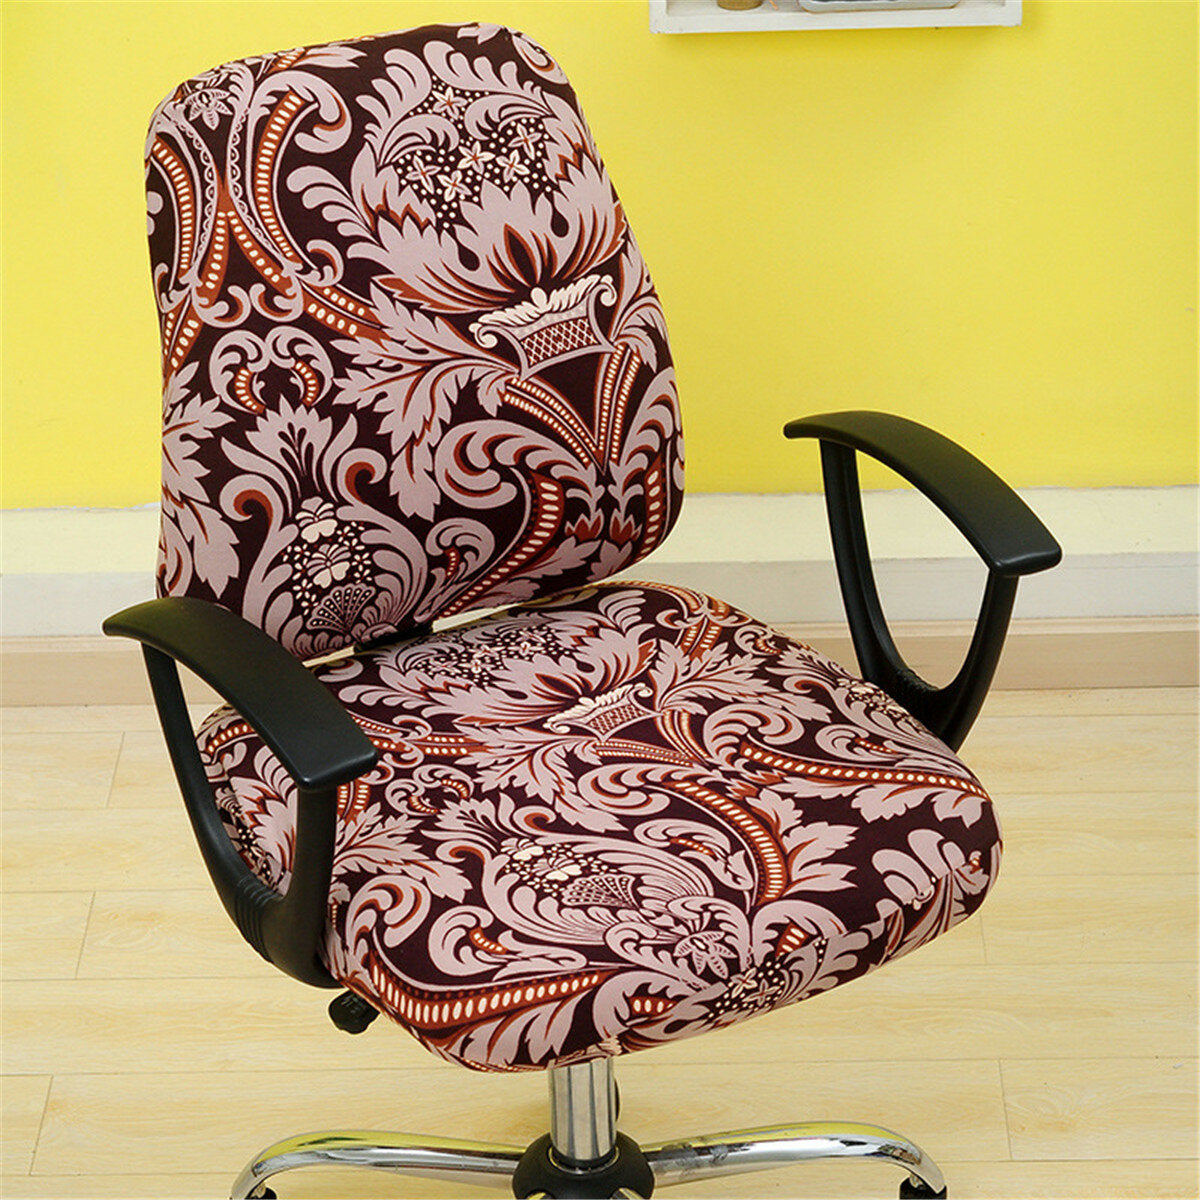 Elastic Chair Cover Home Office Chair Seat Back Cover Protector Set Slipcover Decoration Protect Cushion Supplies